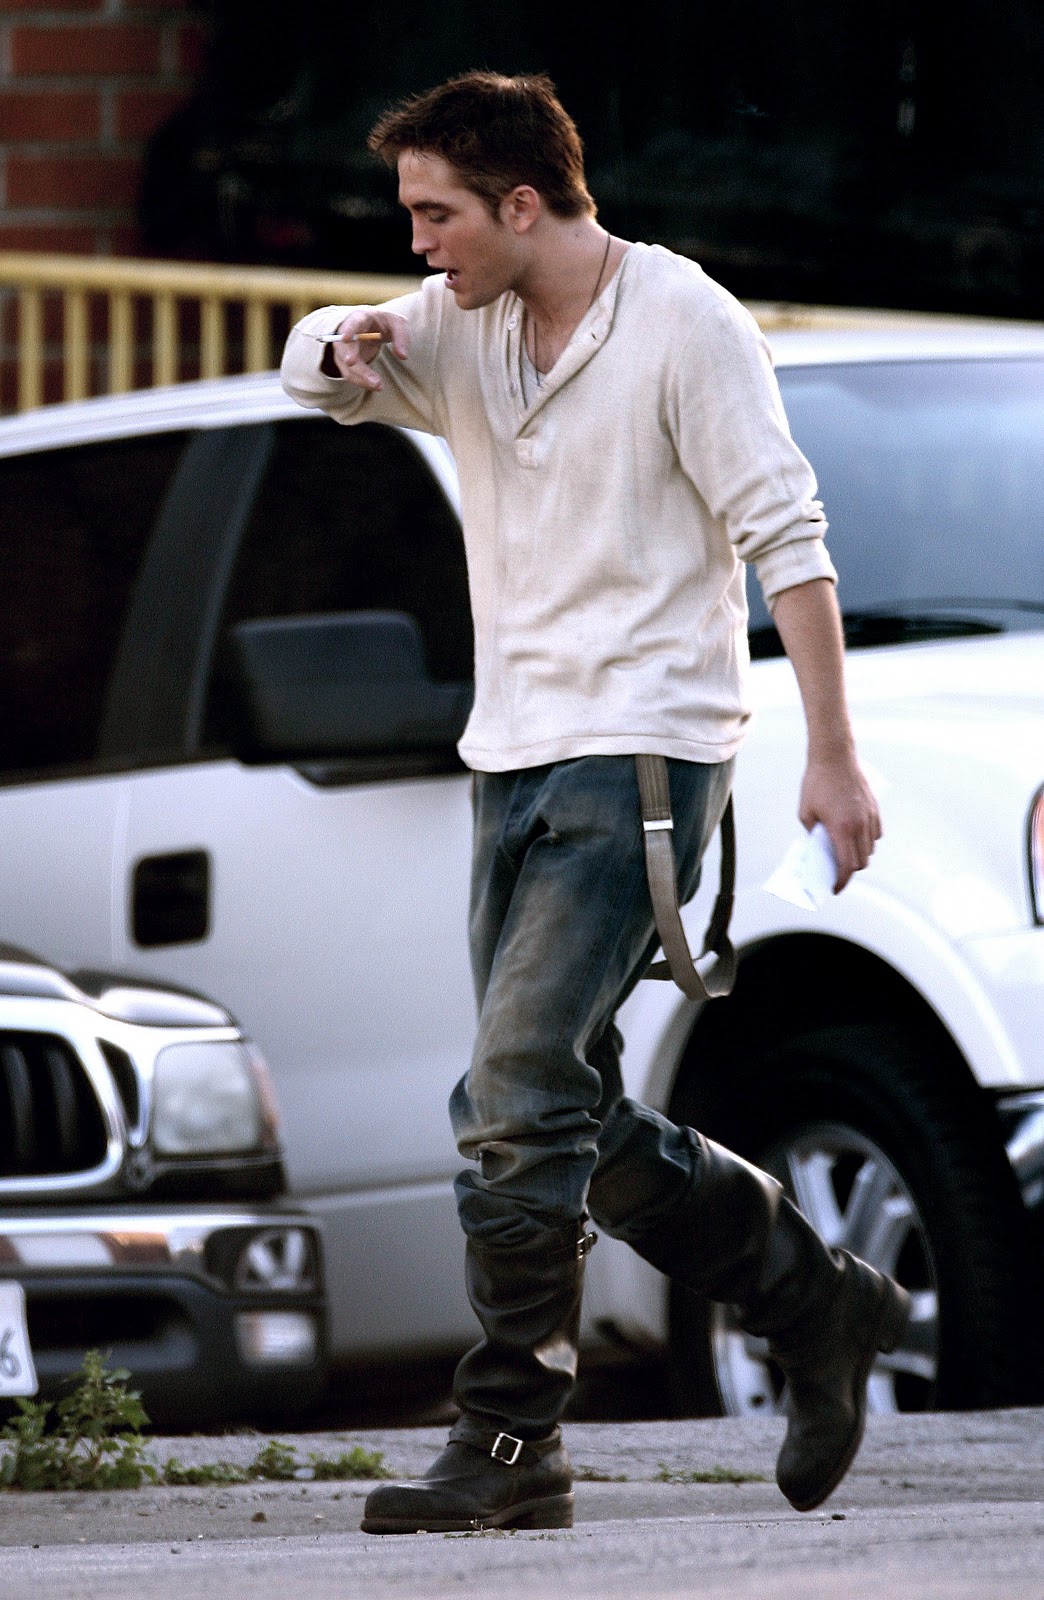 Pattinson Gallery: HQ Pictures of Robert Pattinson on WFE Set Yesterday1044 x 1600